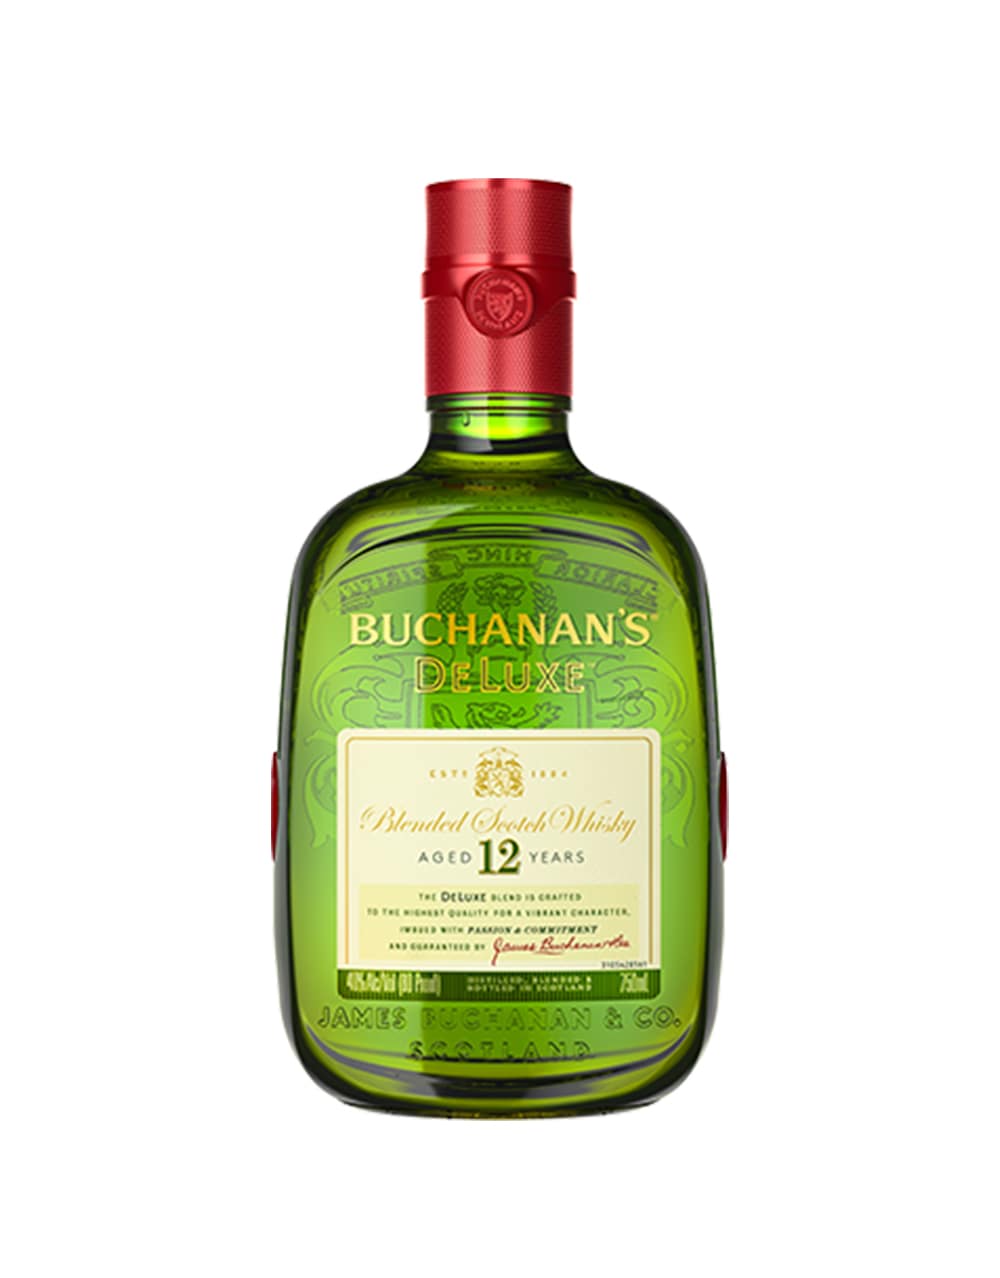 Buchanans DeLuxe 12 Years old Scotch Whisky 1.75L